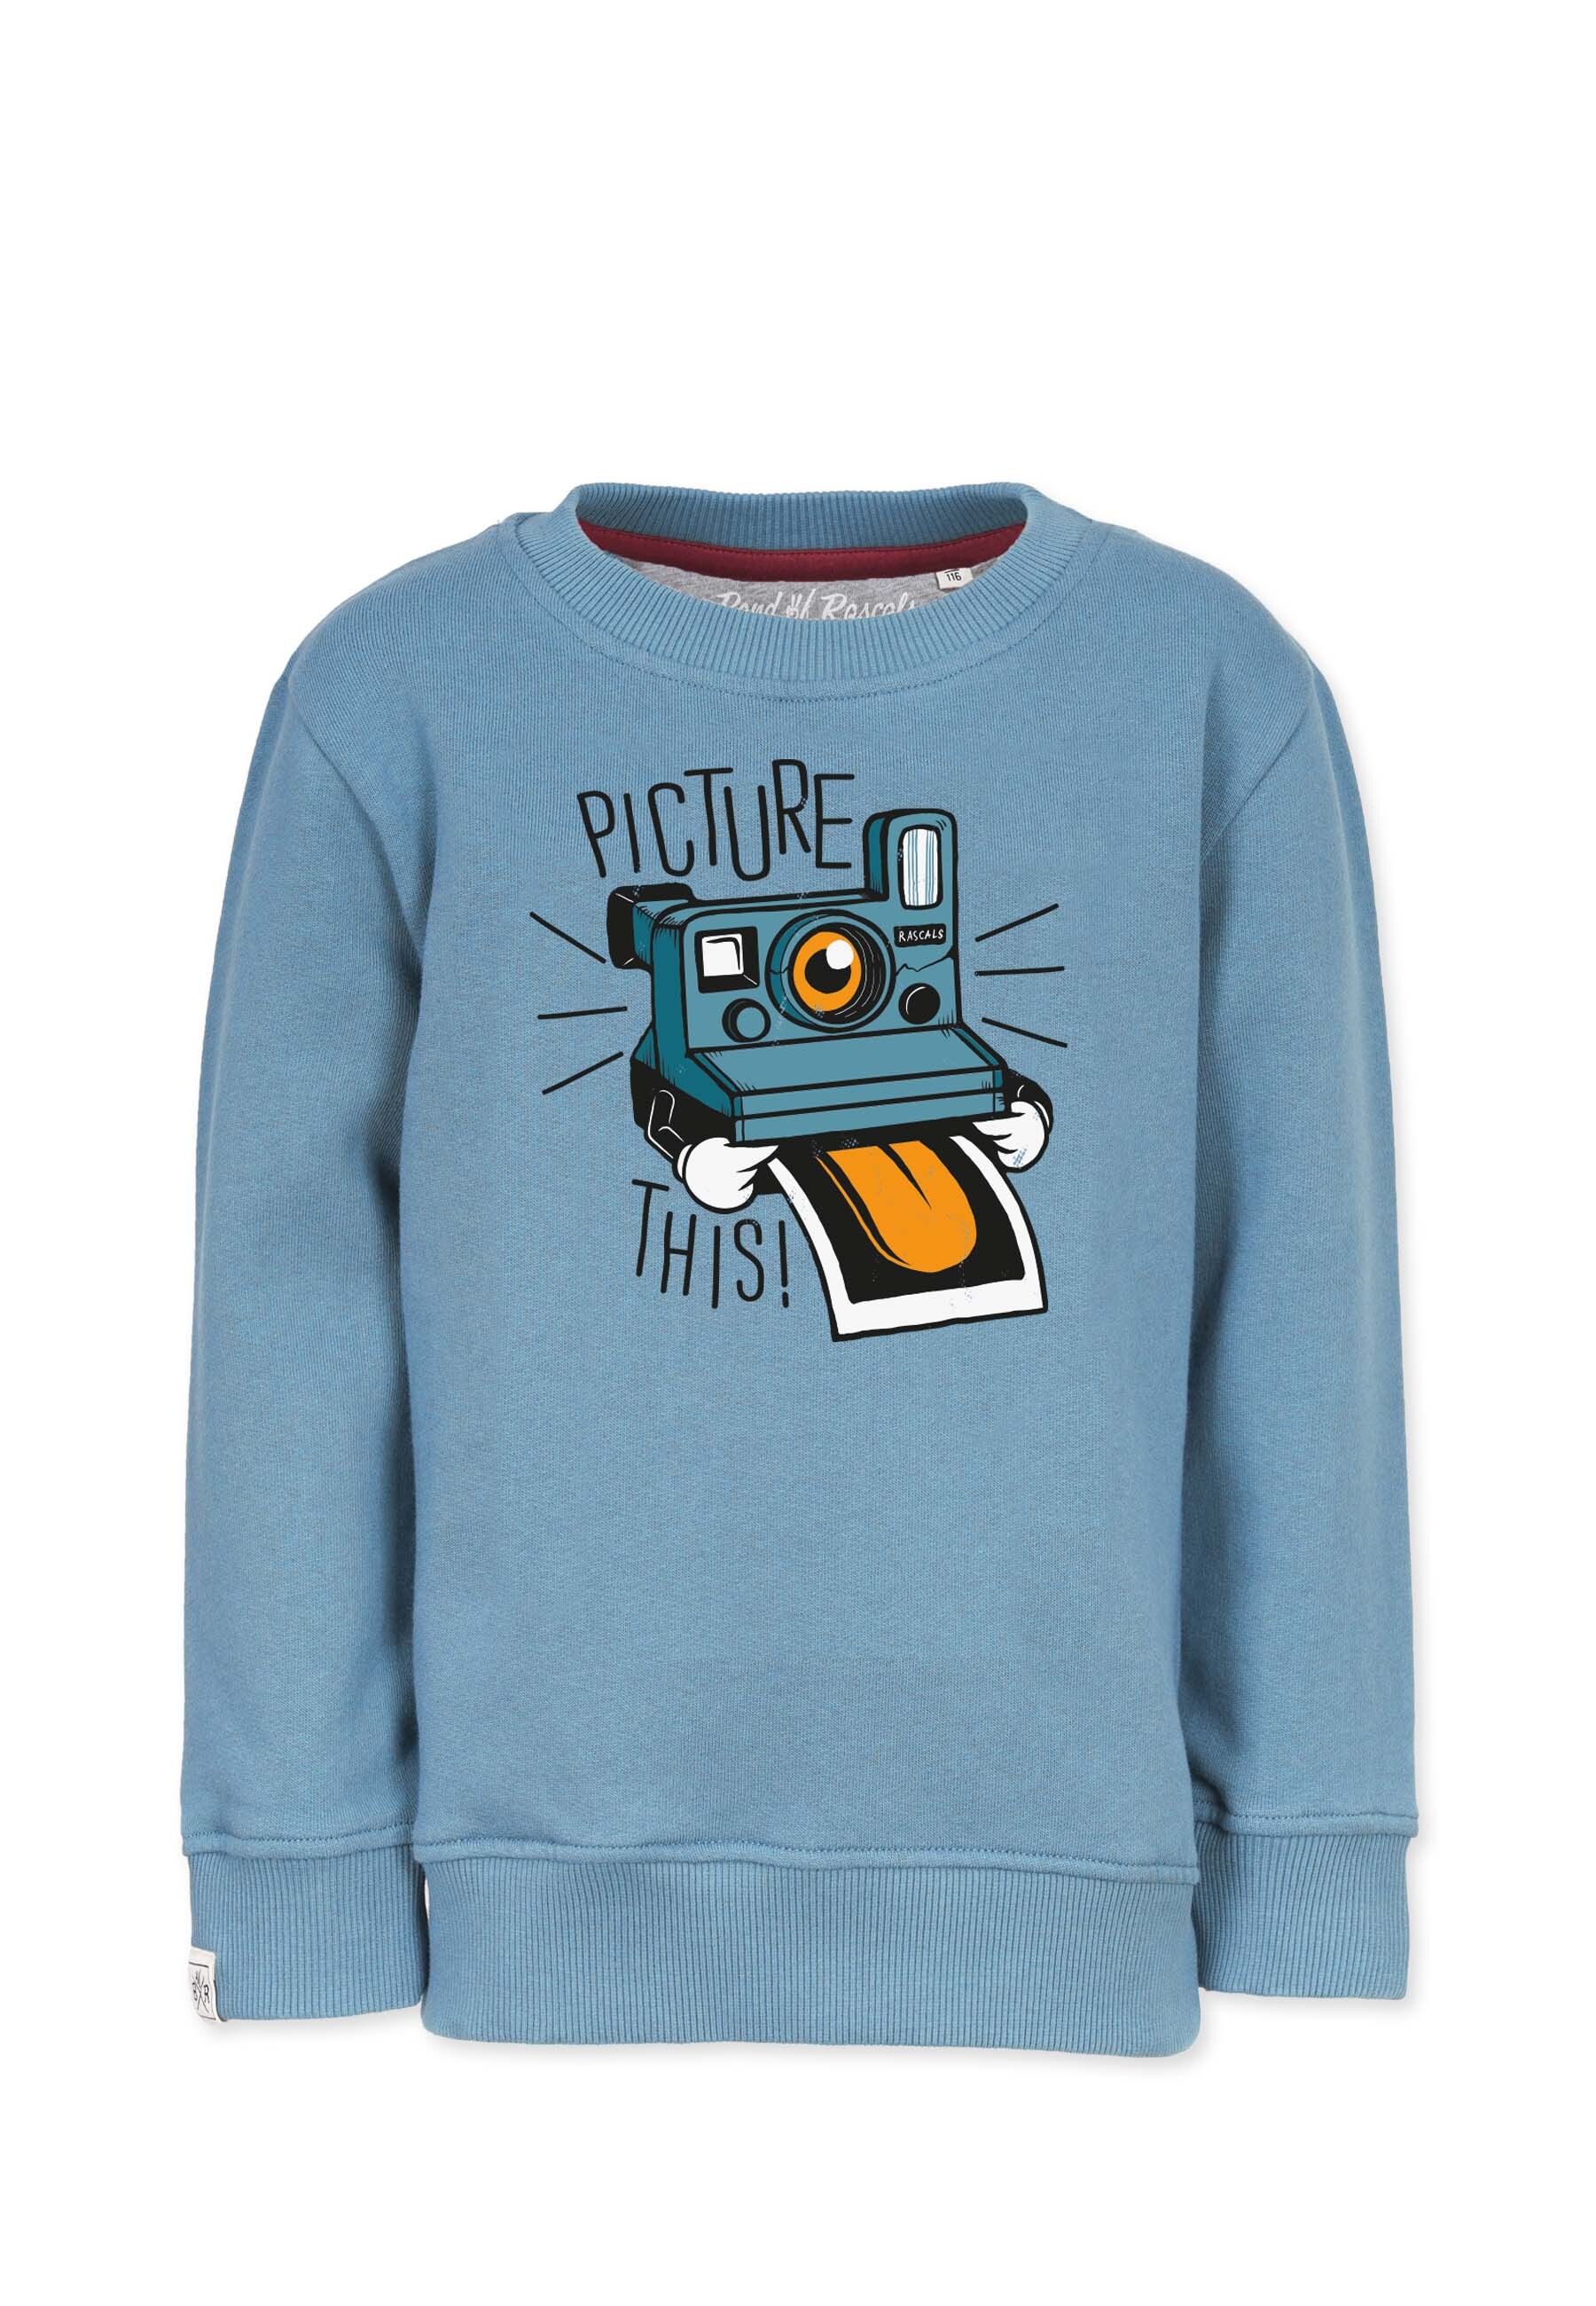 Пуловер Band of Rascals Sweatwear Picture This, цвет aegean blue